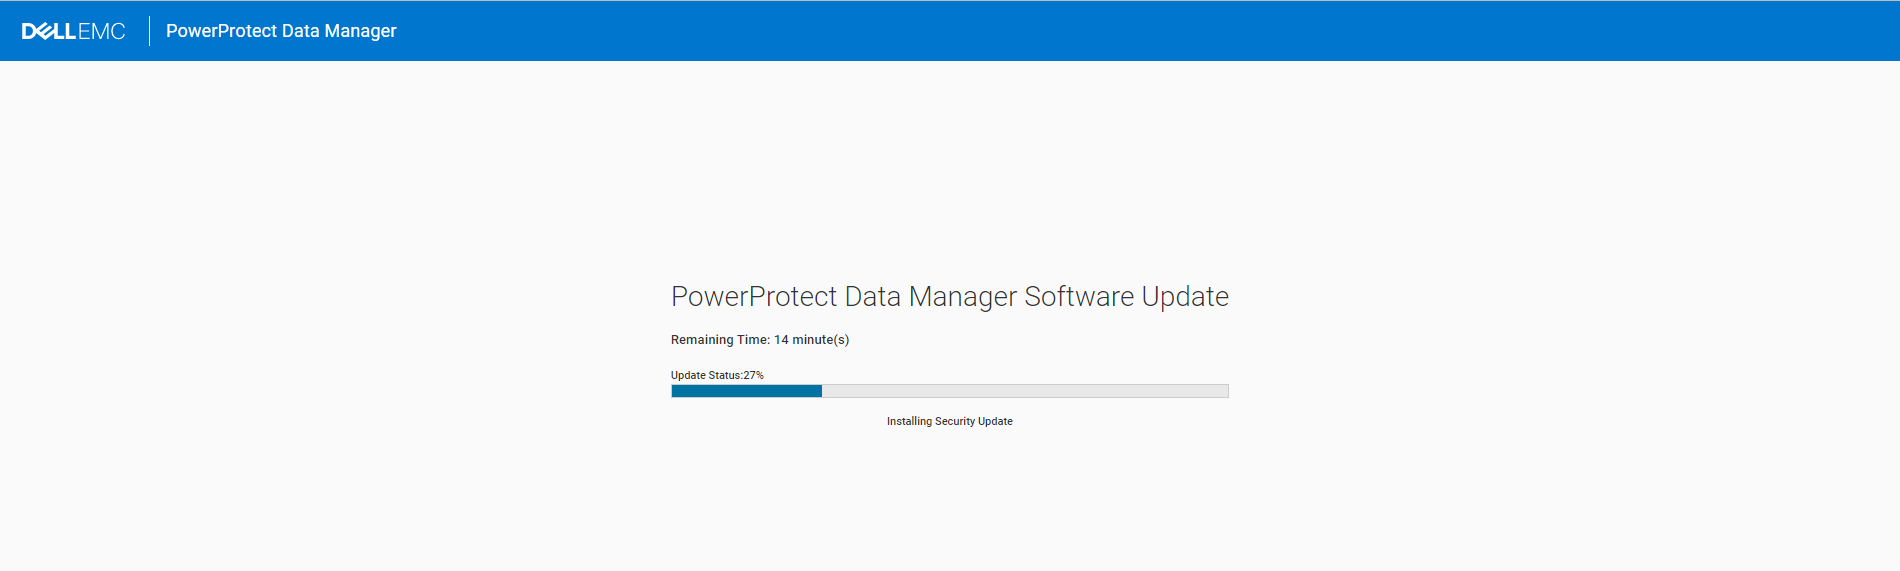 Update DELL PowerProtect Datamanager Appliance using Ansible Roles and Playbooks